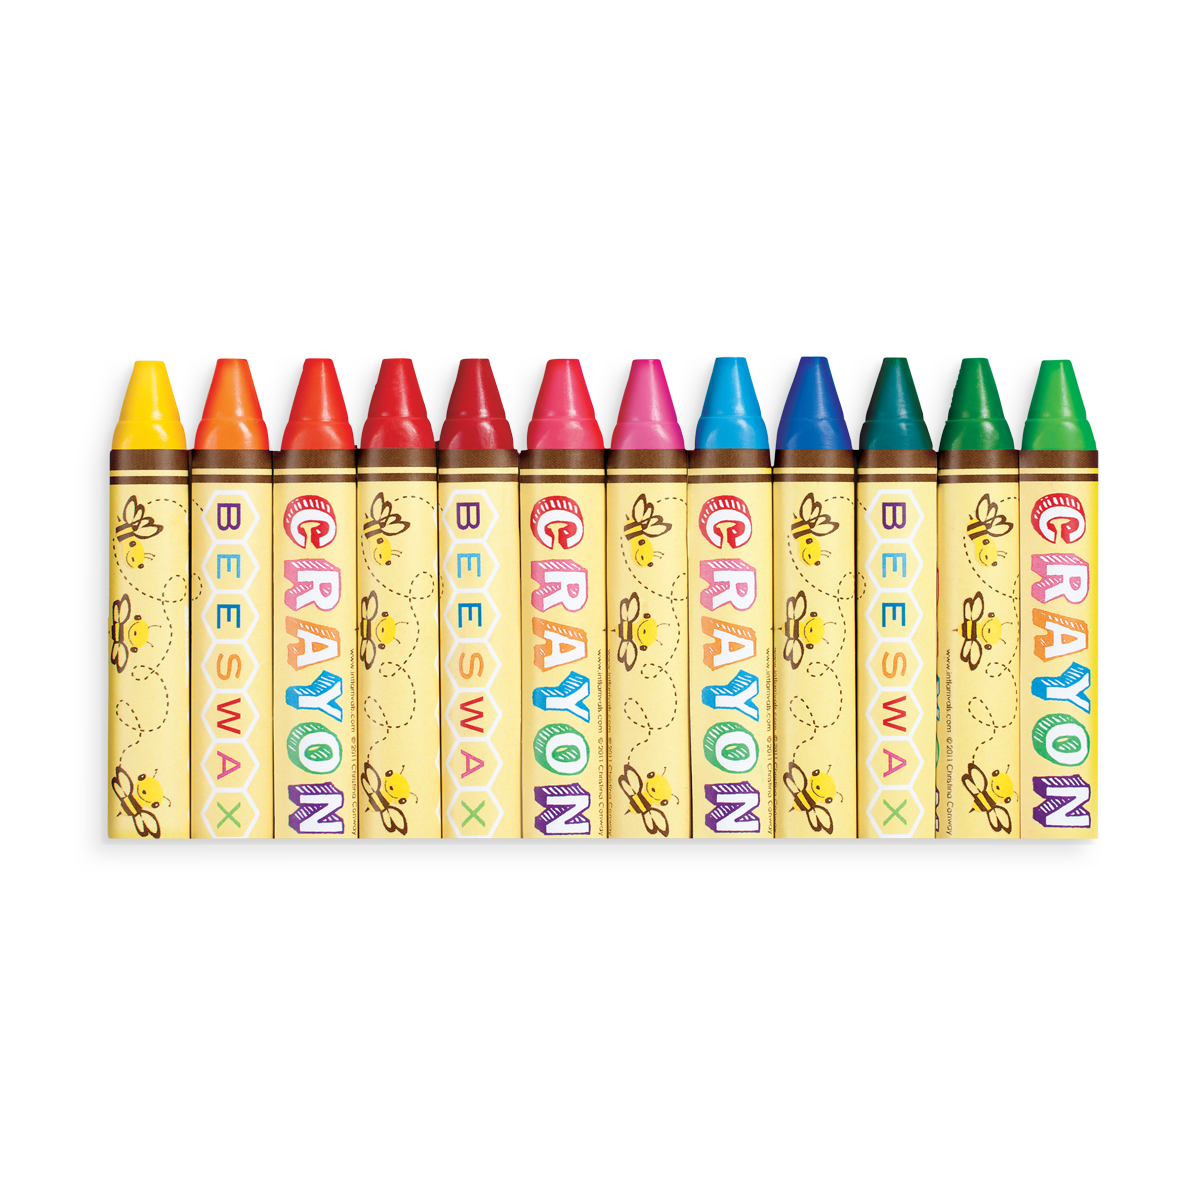 Crayons non-toxic crayons baby smooth washable crayons for painting tools Crayons  non-toxic crayons baby smooth washable crayons for painting tools,18 Colors  